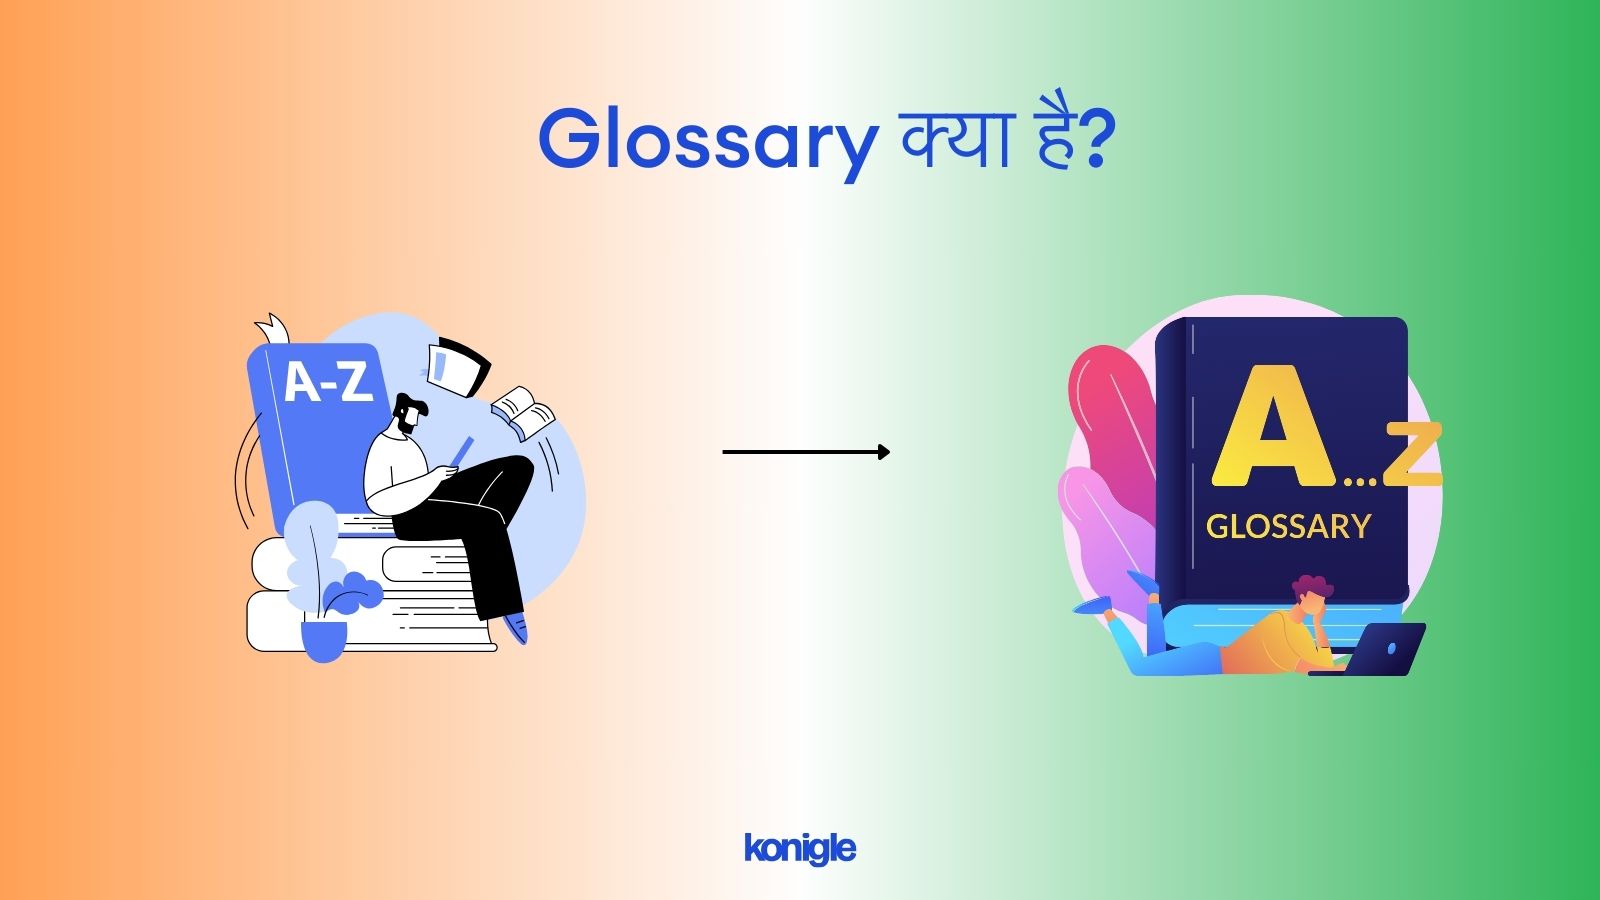 Glossary meaning in hindi